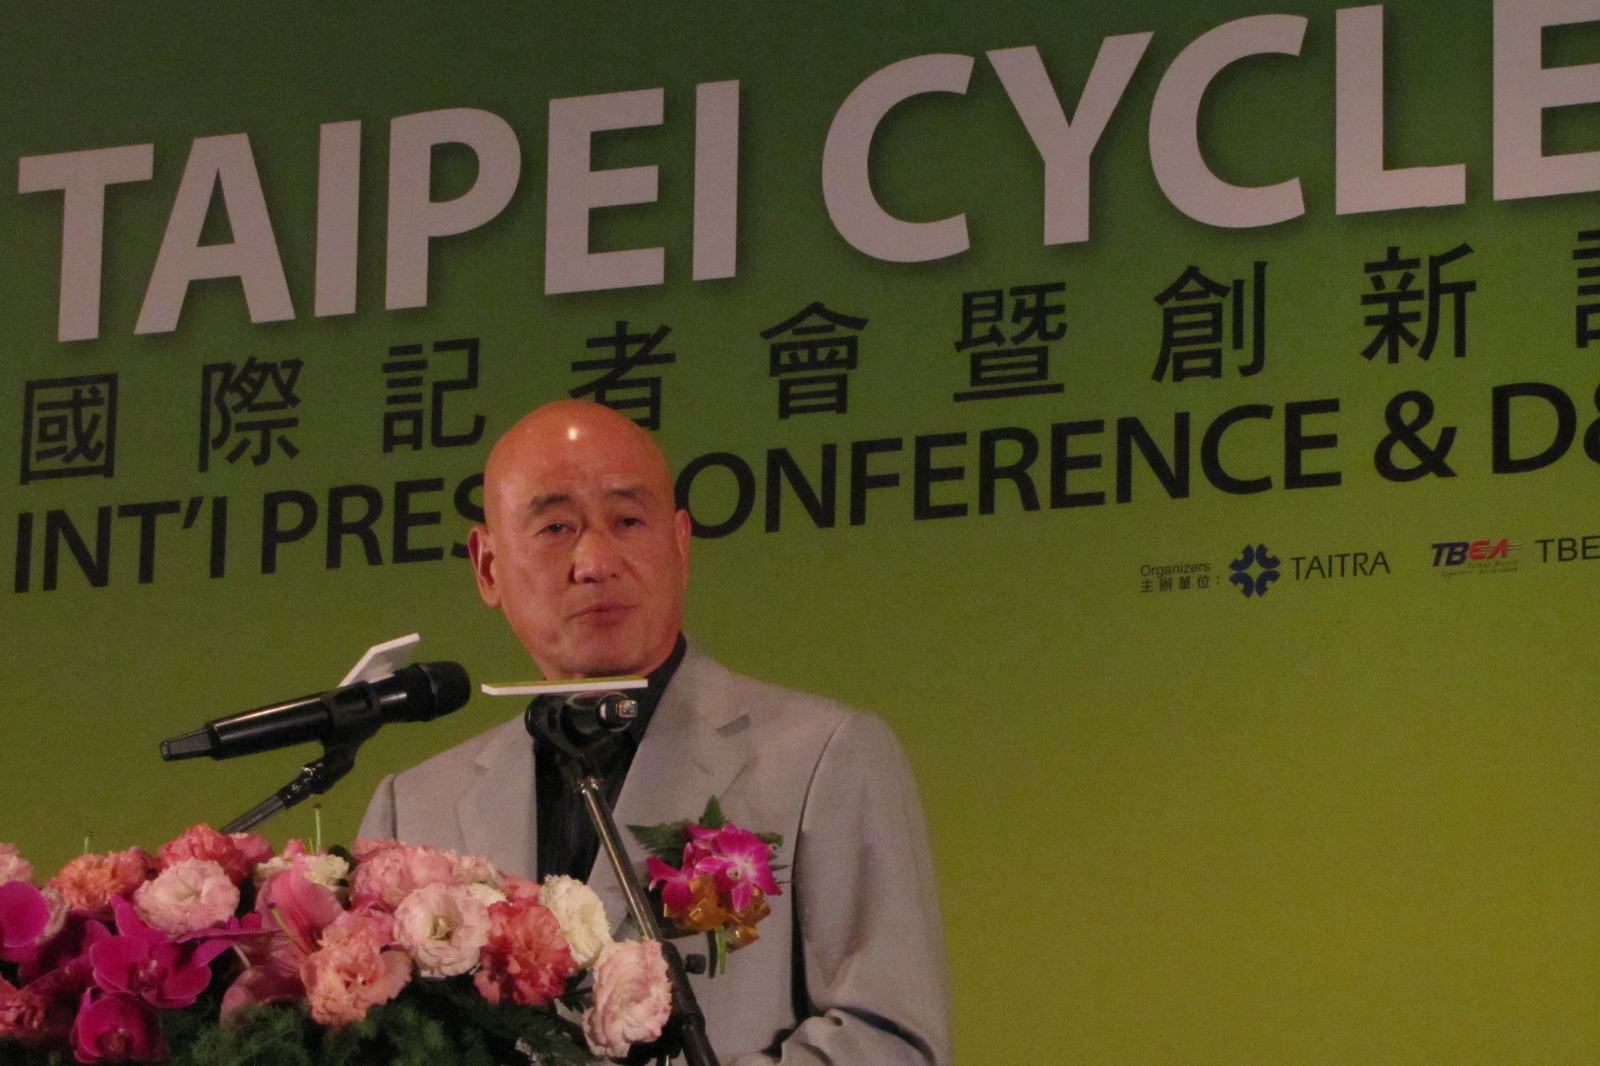 At the opening of the 2013 Taipei Cycle Show TBEA chairman Tony Lo, stated that, “some people are suggesting to change the dates of Taipei Cycle from March to July."